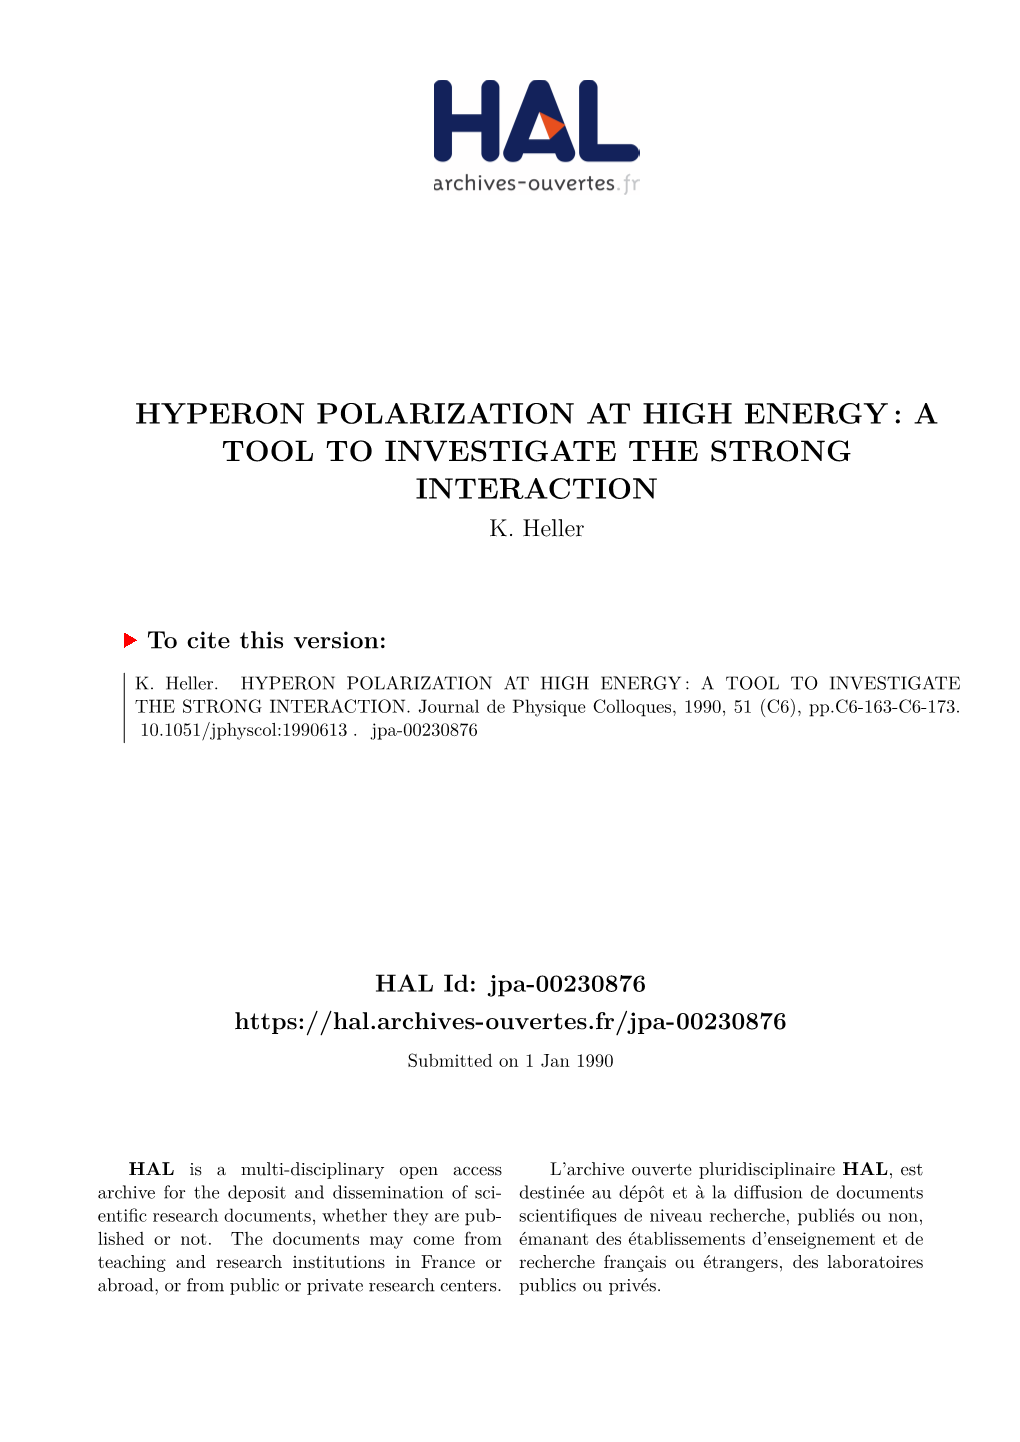 Hyperon Polarization at High Energy : a Tool to Investigate the Strong Interaction K